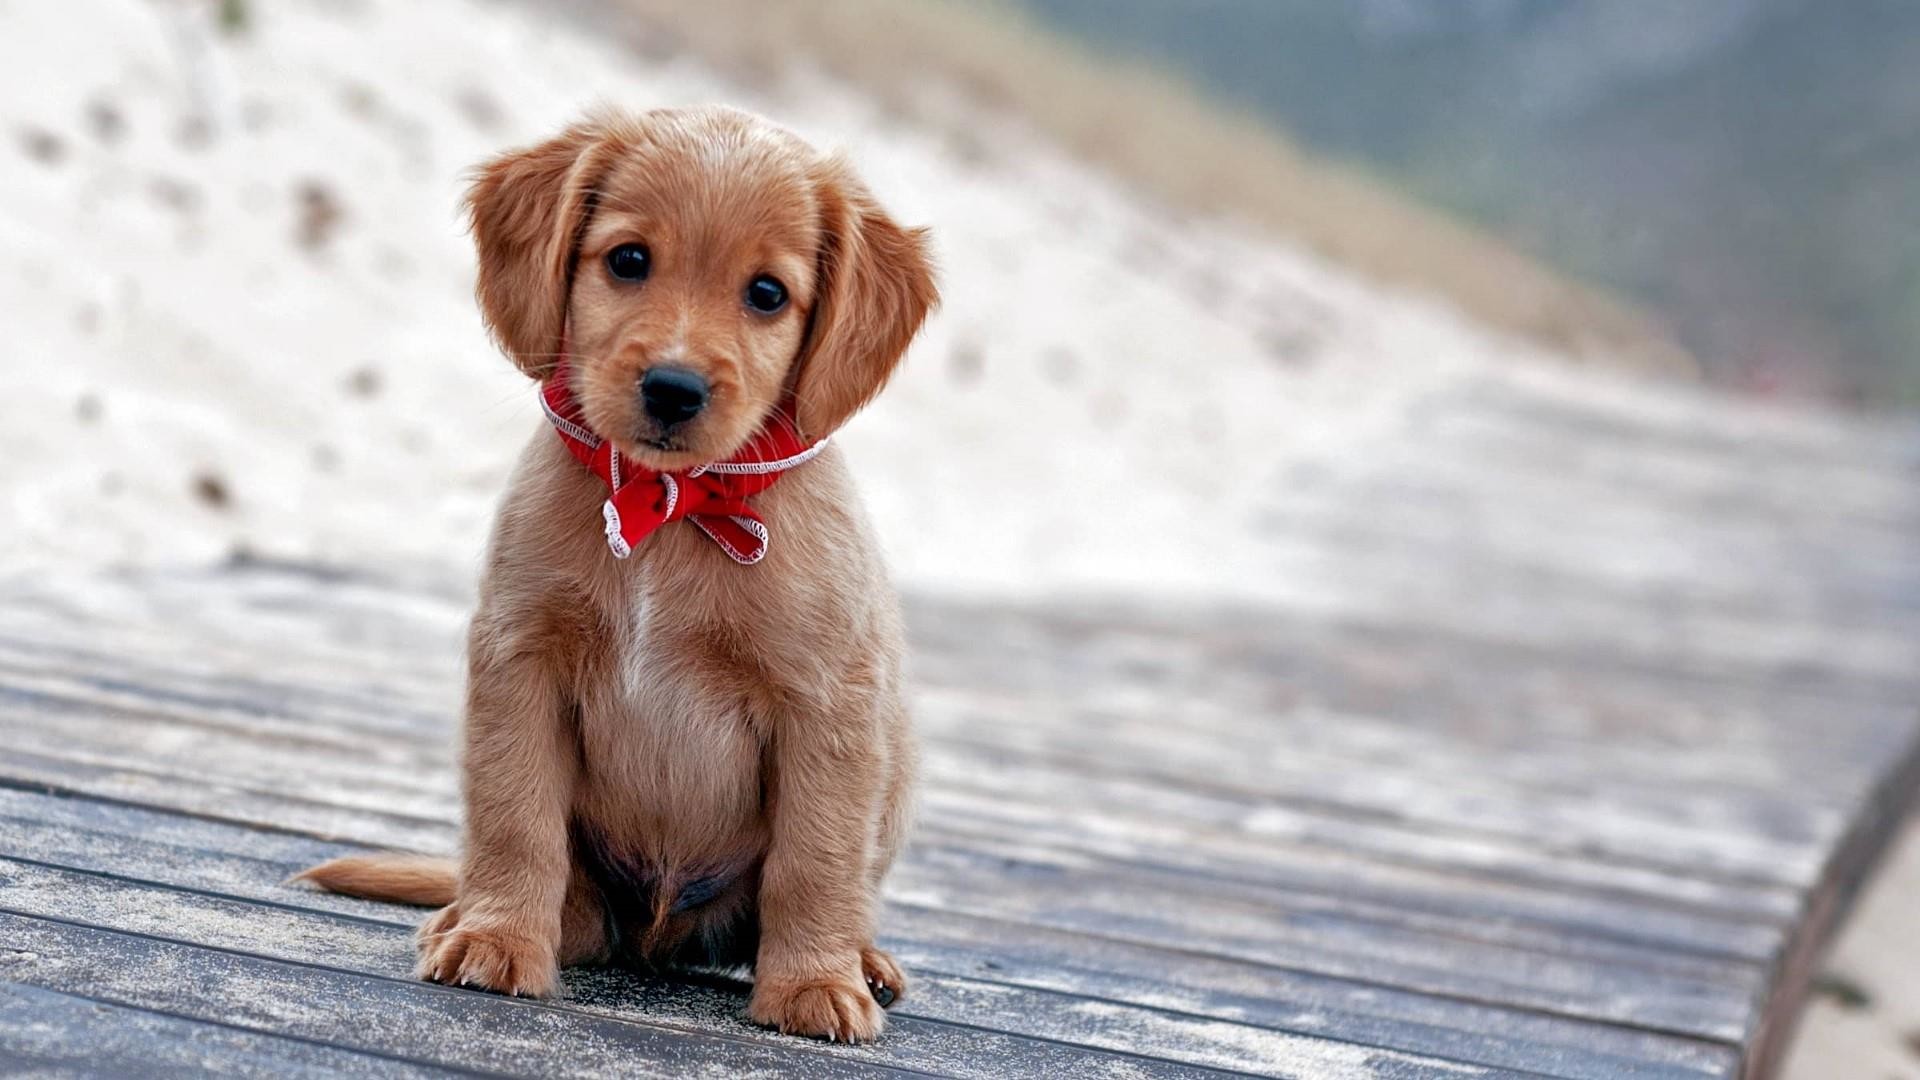 Cute Puppy Pictures Wallpaper (59+ pictures)